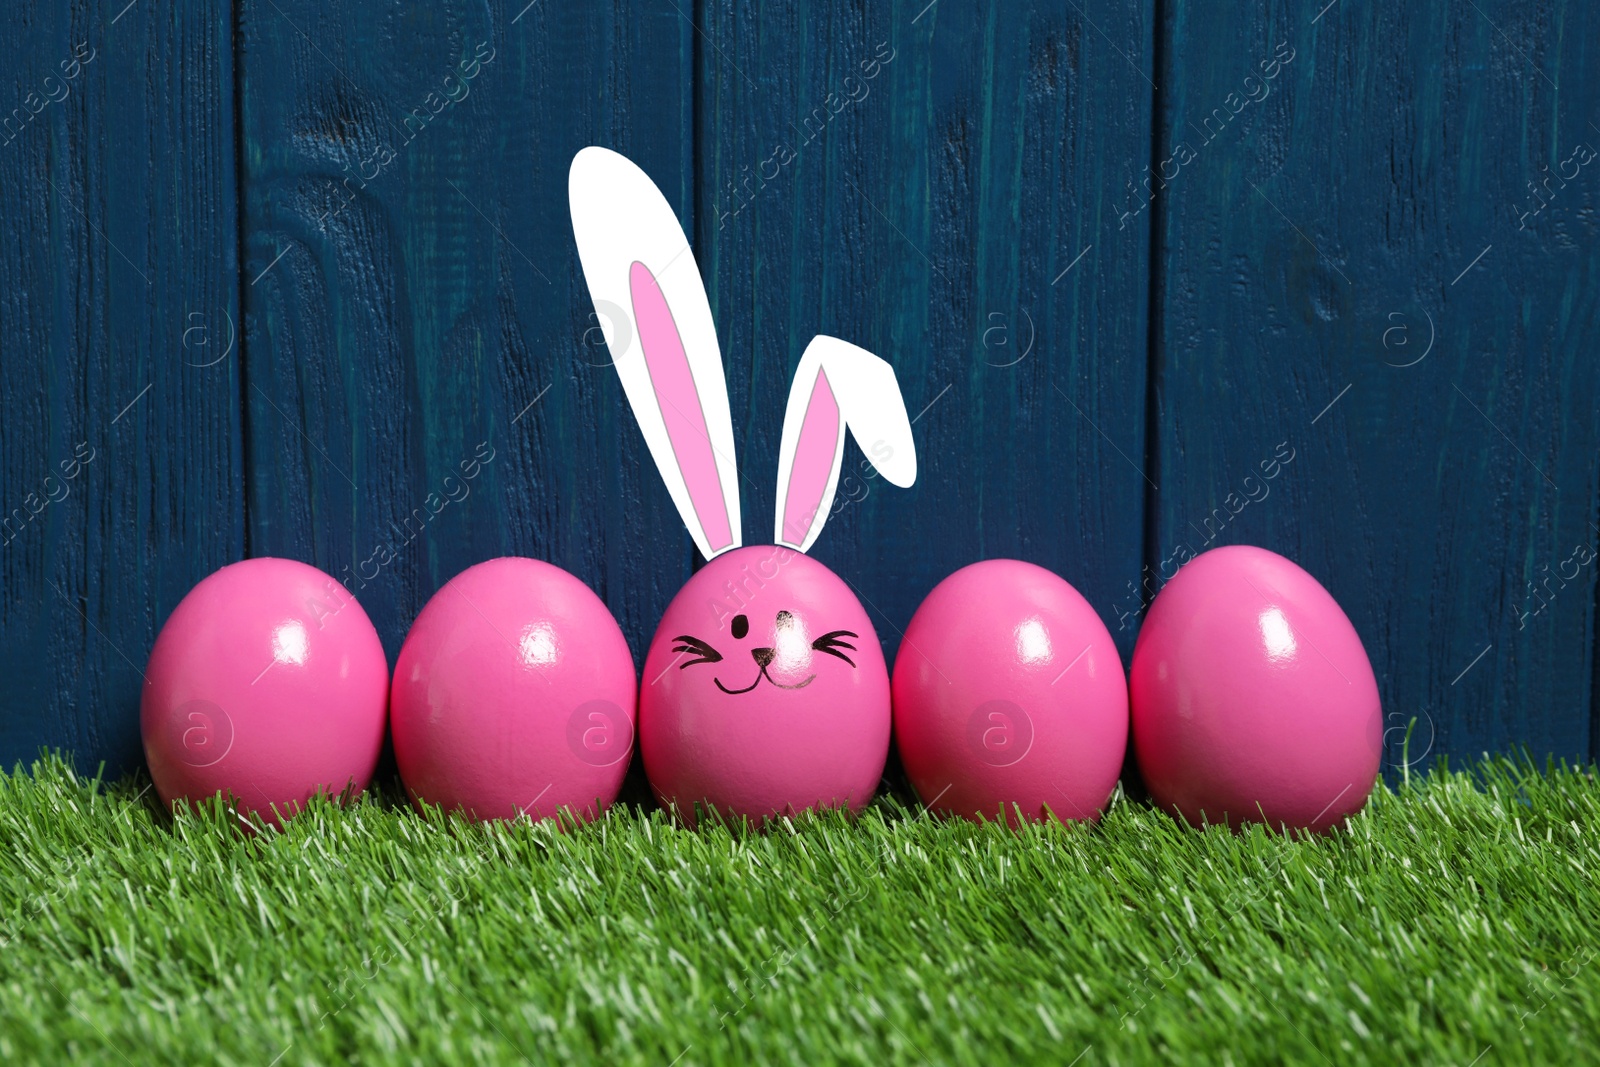 Image of One egg with drawn face and ears as Easter bunny among others on green grass against blue wooden background